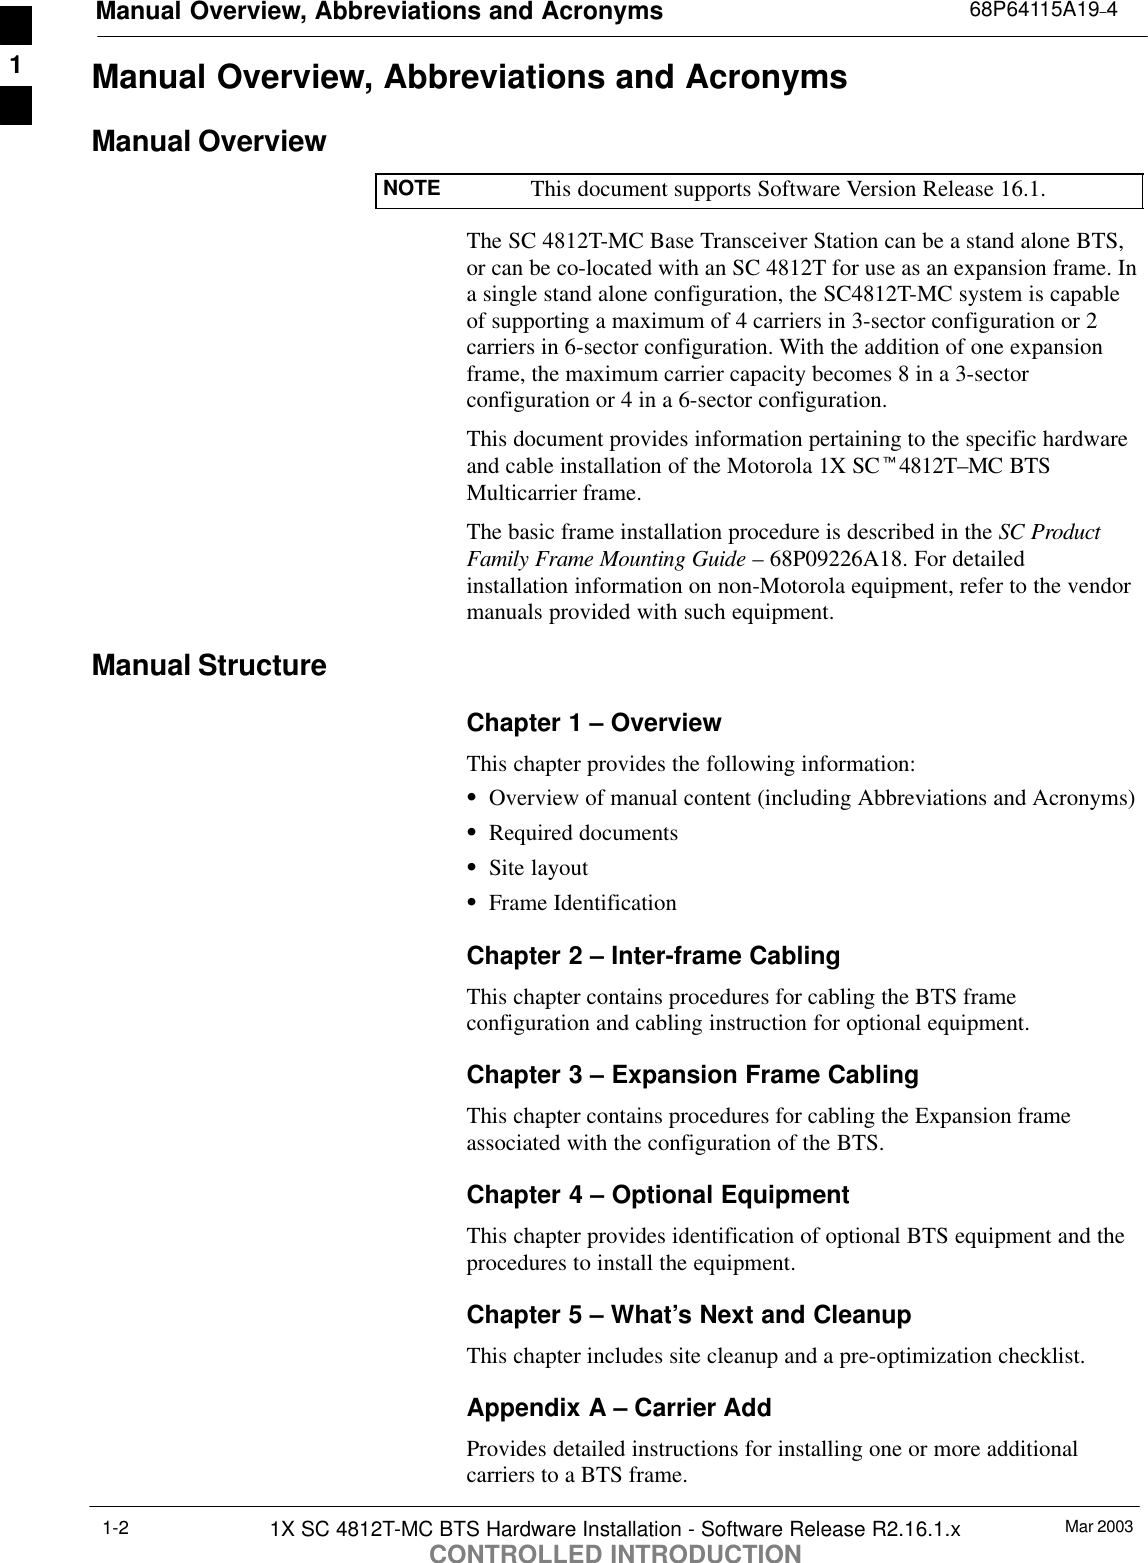 Manual Overview, Abbreviations and Acronyms 68P64115A19–4Mar 20031X SC 4812T-MC BTS Hardware Installation - Software Release R2.16.1.xCONTROLLED INTRODUCTION1-2Manual Overview, Abbreviations and AcronymsManual OverviewNOTE This document supports Software Version Release 16.1.The SC 4812T-MC Base Transceiver Station can be a stand alone BTS,or can be co-located with an SC 4812T for use as an expansion frame. Ina single stand alone configuration, the SC4812T-MC system is capableof supporting a maximum of 4 carriers in 3-sector configuration or 2carriers in 6-sector configuration. With the addition of one expansionframe, the maximum carrier capacity becomes 8 in a 3-sectorconfiguration or 4 in a 6-sector configuration.This document provides information pertaining to the specific hardwareand cable installation of the Motorola 1X SCt4812T–MC BTSMulticarrier frame.The basic frame installation procedure is described in the SC ProductFamily Frame Mounting Guide – 68P09226A18. For detailedinstallation information on non-Motorola equipment, refer to the vendormanuals provided with such equipment.Manual StructureChapter 1 – OverviewThis chapter provides the following information:SOverview of manual content (including Abbreviations and Acronyms)SRequired documentsSSite layoutSFrame IdentificationChapter 2 – Inter-frame CablingThis chapter contains procedures for cabling the BTS frameconfiguration and cabling instruction for optional equipment.Chapter 3 – Expansion Frame CablingThis chapter contains procedures for cabling the Expansion frameassociated with the configuration of the BTS.Chapter 4 – Optional EquipmentThis chapter provides identification of optional BTS equipment and theprocedures to install the equipment.Chapter 5 – What’s Next and CleanupThis chapter includes site cleanup and a pre-optimization checklist.Appendix A – Carrier AddProvides detailed instructions for installing one or more additionalcarriers to a BTS frame.1